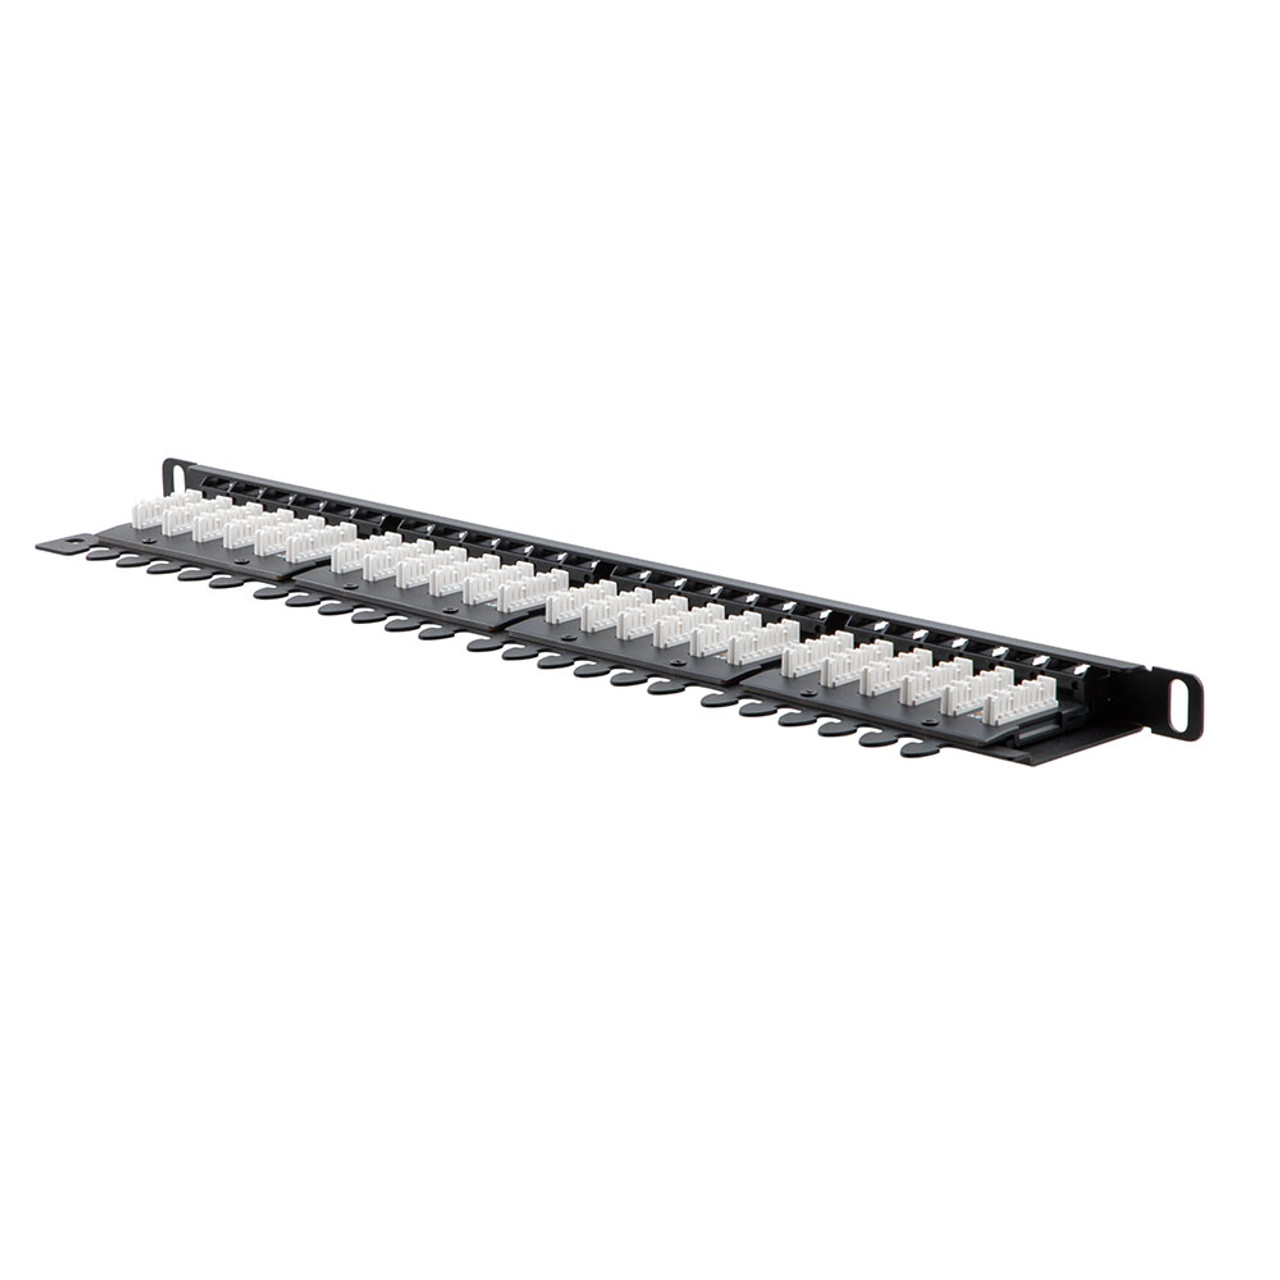 NavePoint 19-inch wide 24-Port CAT6A UnShielded Patch Panel, 0.5U, Black